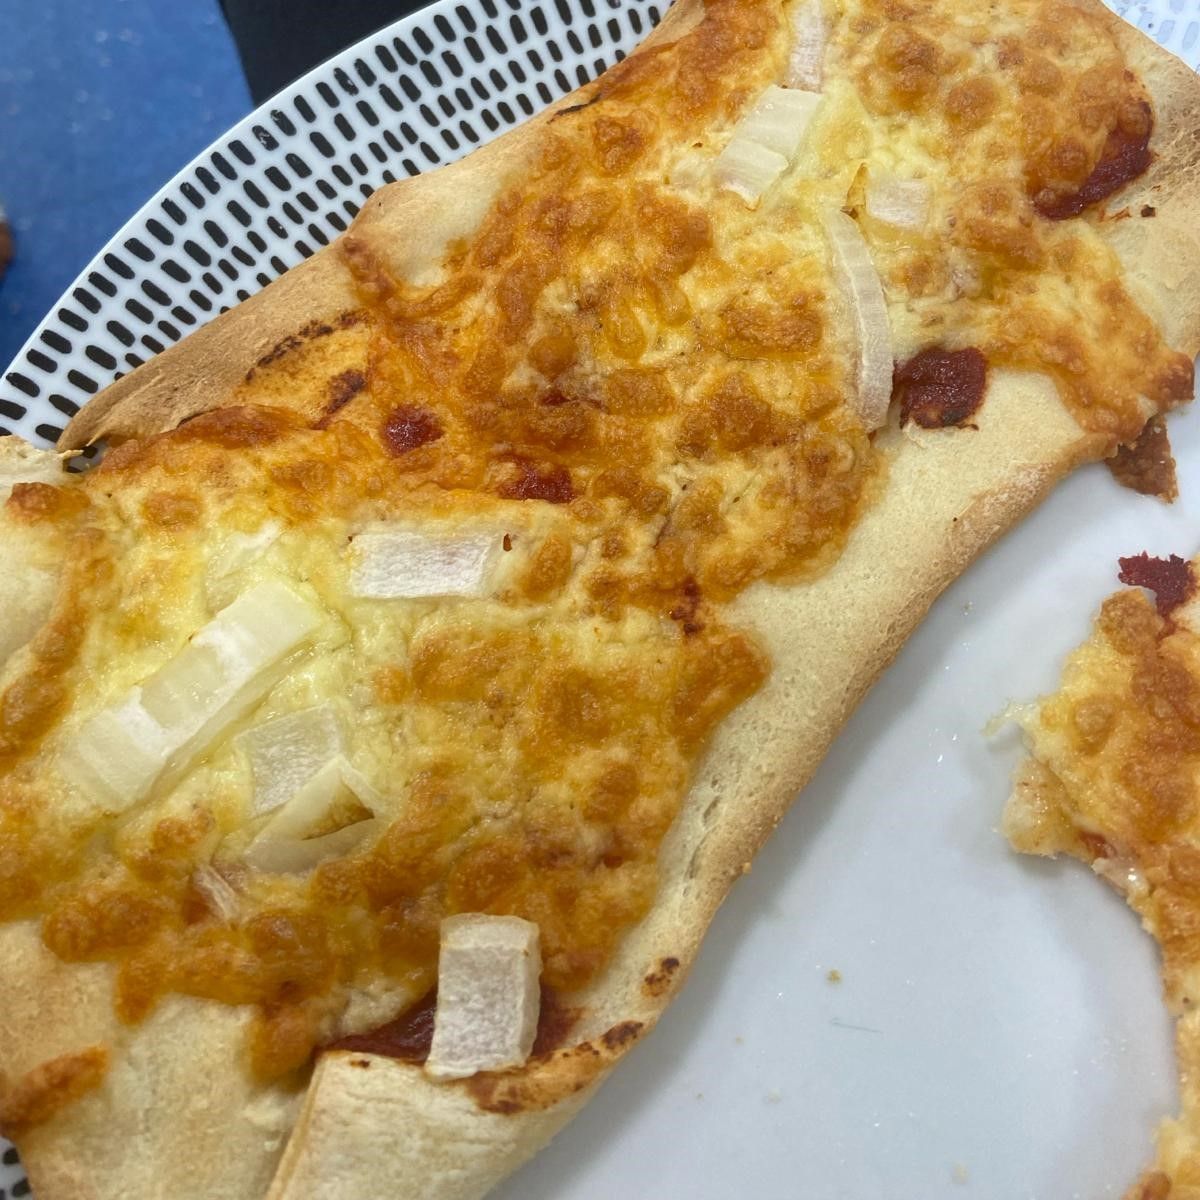 Haverhill Night Hub have been busy recently making their very own, homemade pizzas to enjoy! And don't they just look delicious! 

#LeadTheLifeYouChoose #SocialCare